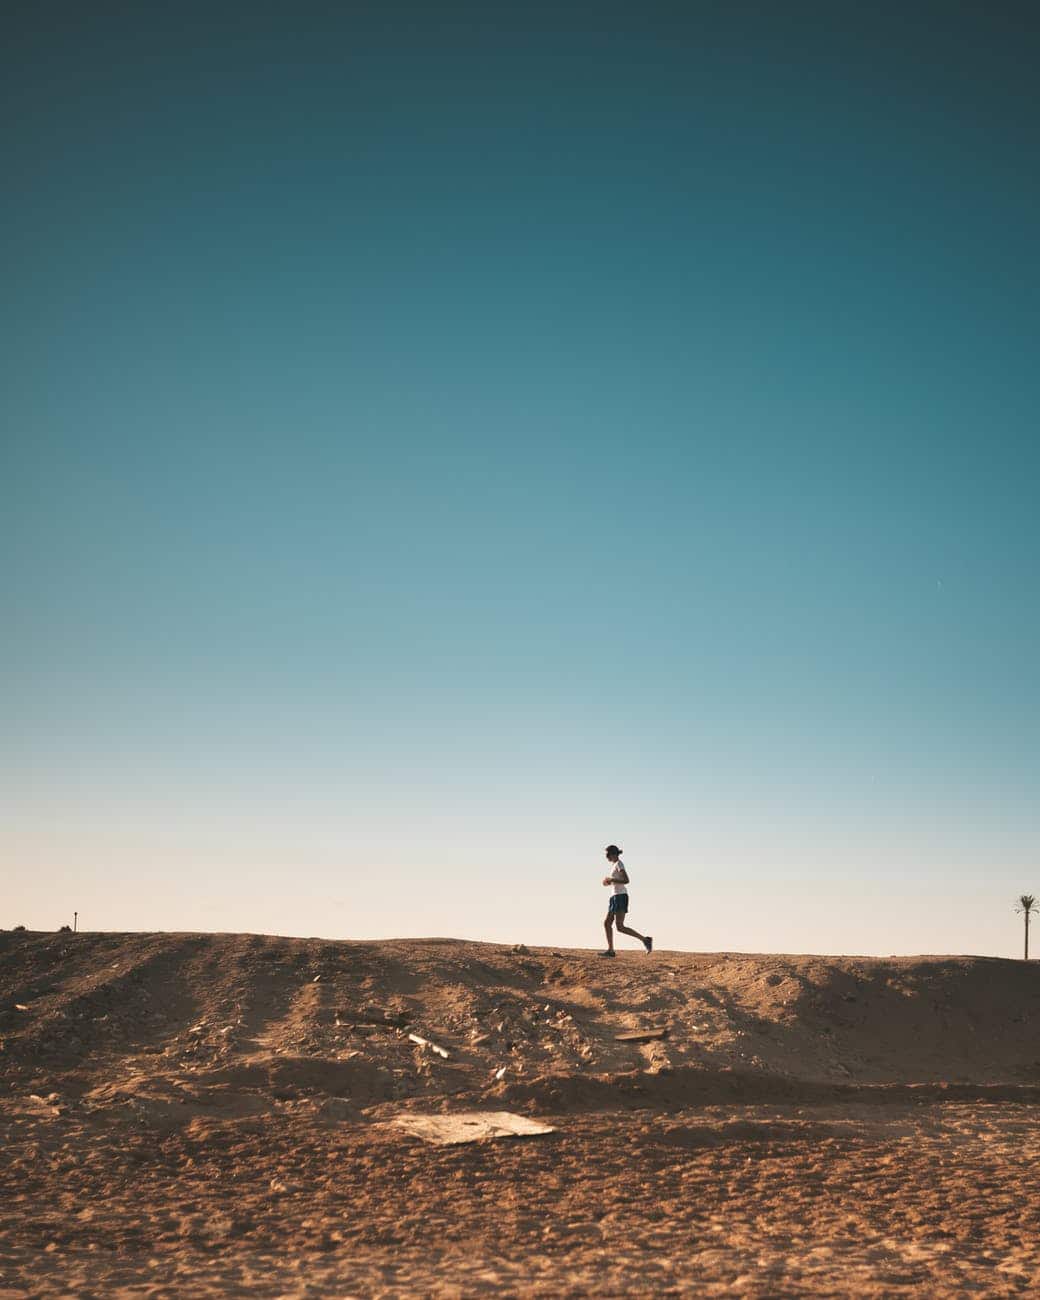 photo of person running on dirt road